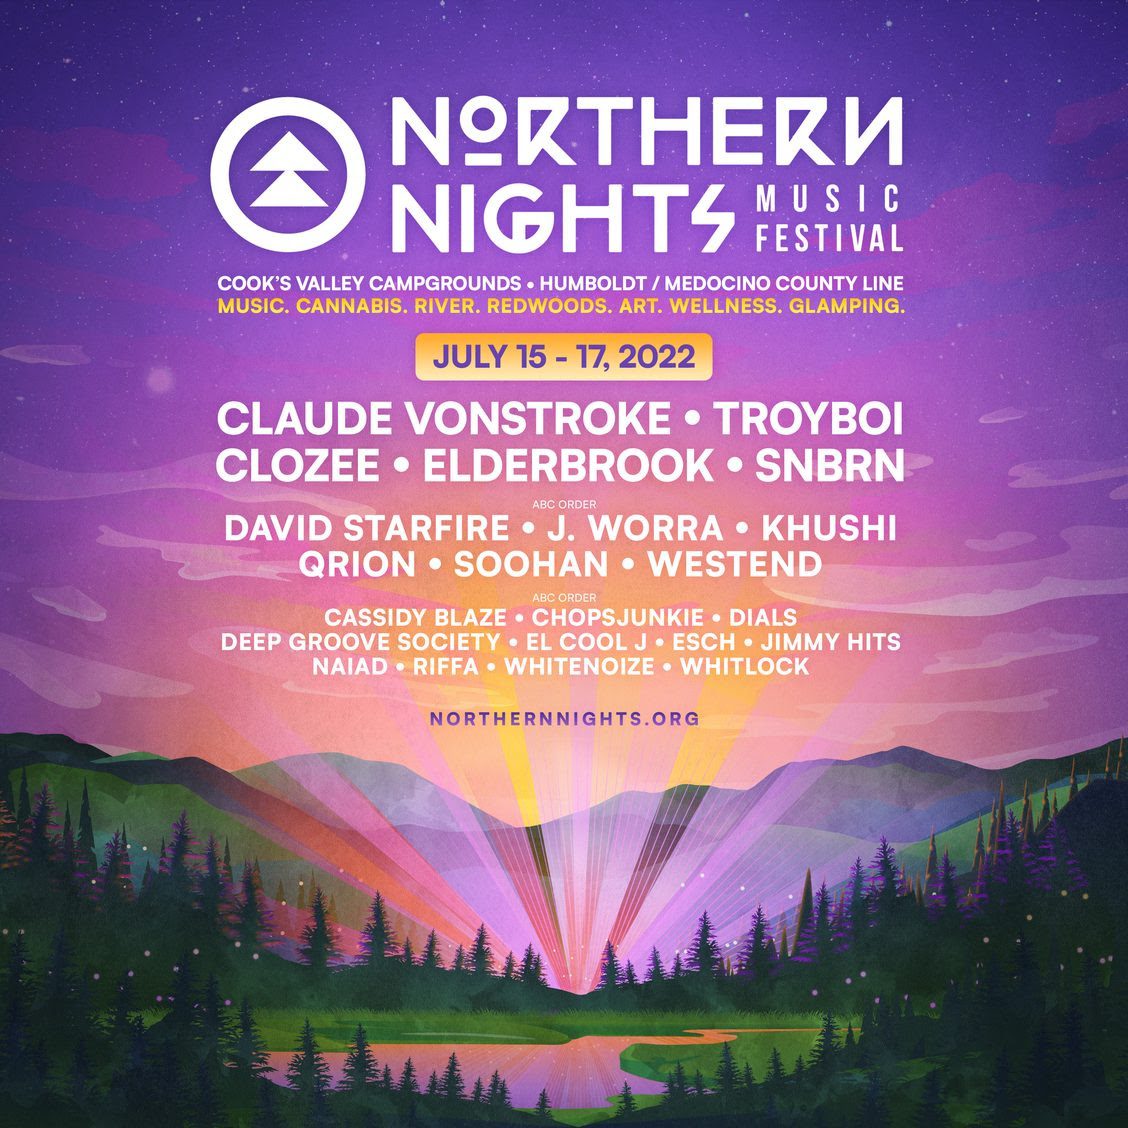 Northern Nights Music Festival Returns To The Redwoods Of Northern